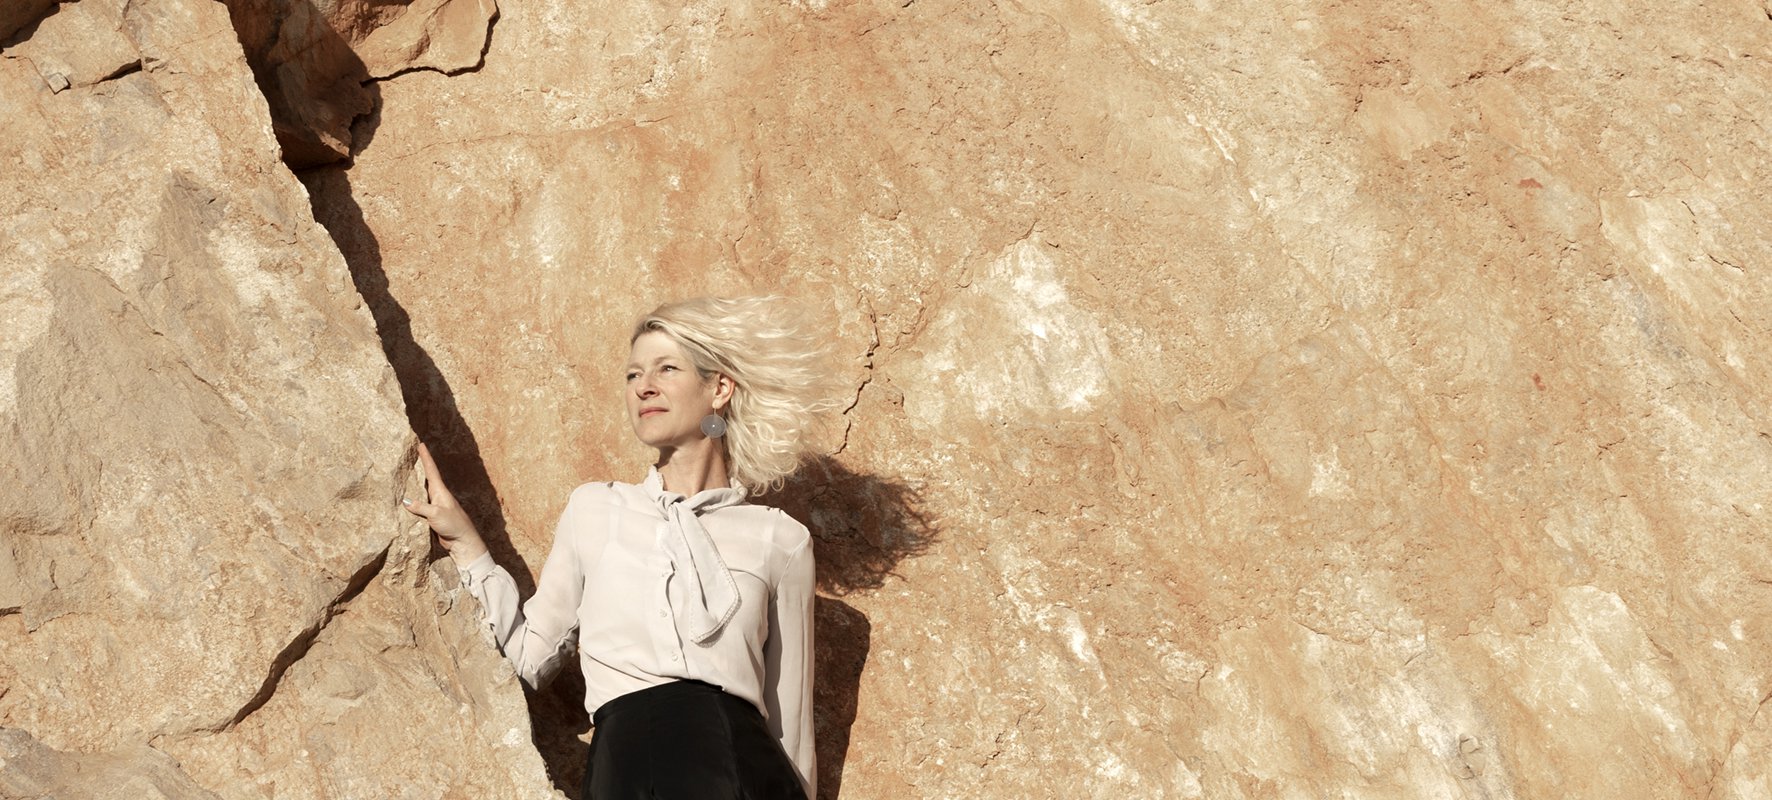 A photo of Elliat Rich standing in a crevice of a rock-face exposed as part of an extractive mining practice. Wind is blowing through Elliat's short blonde hair as they look into the distance. Credit Martina Capurso.